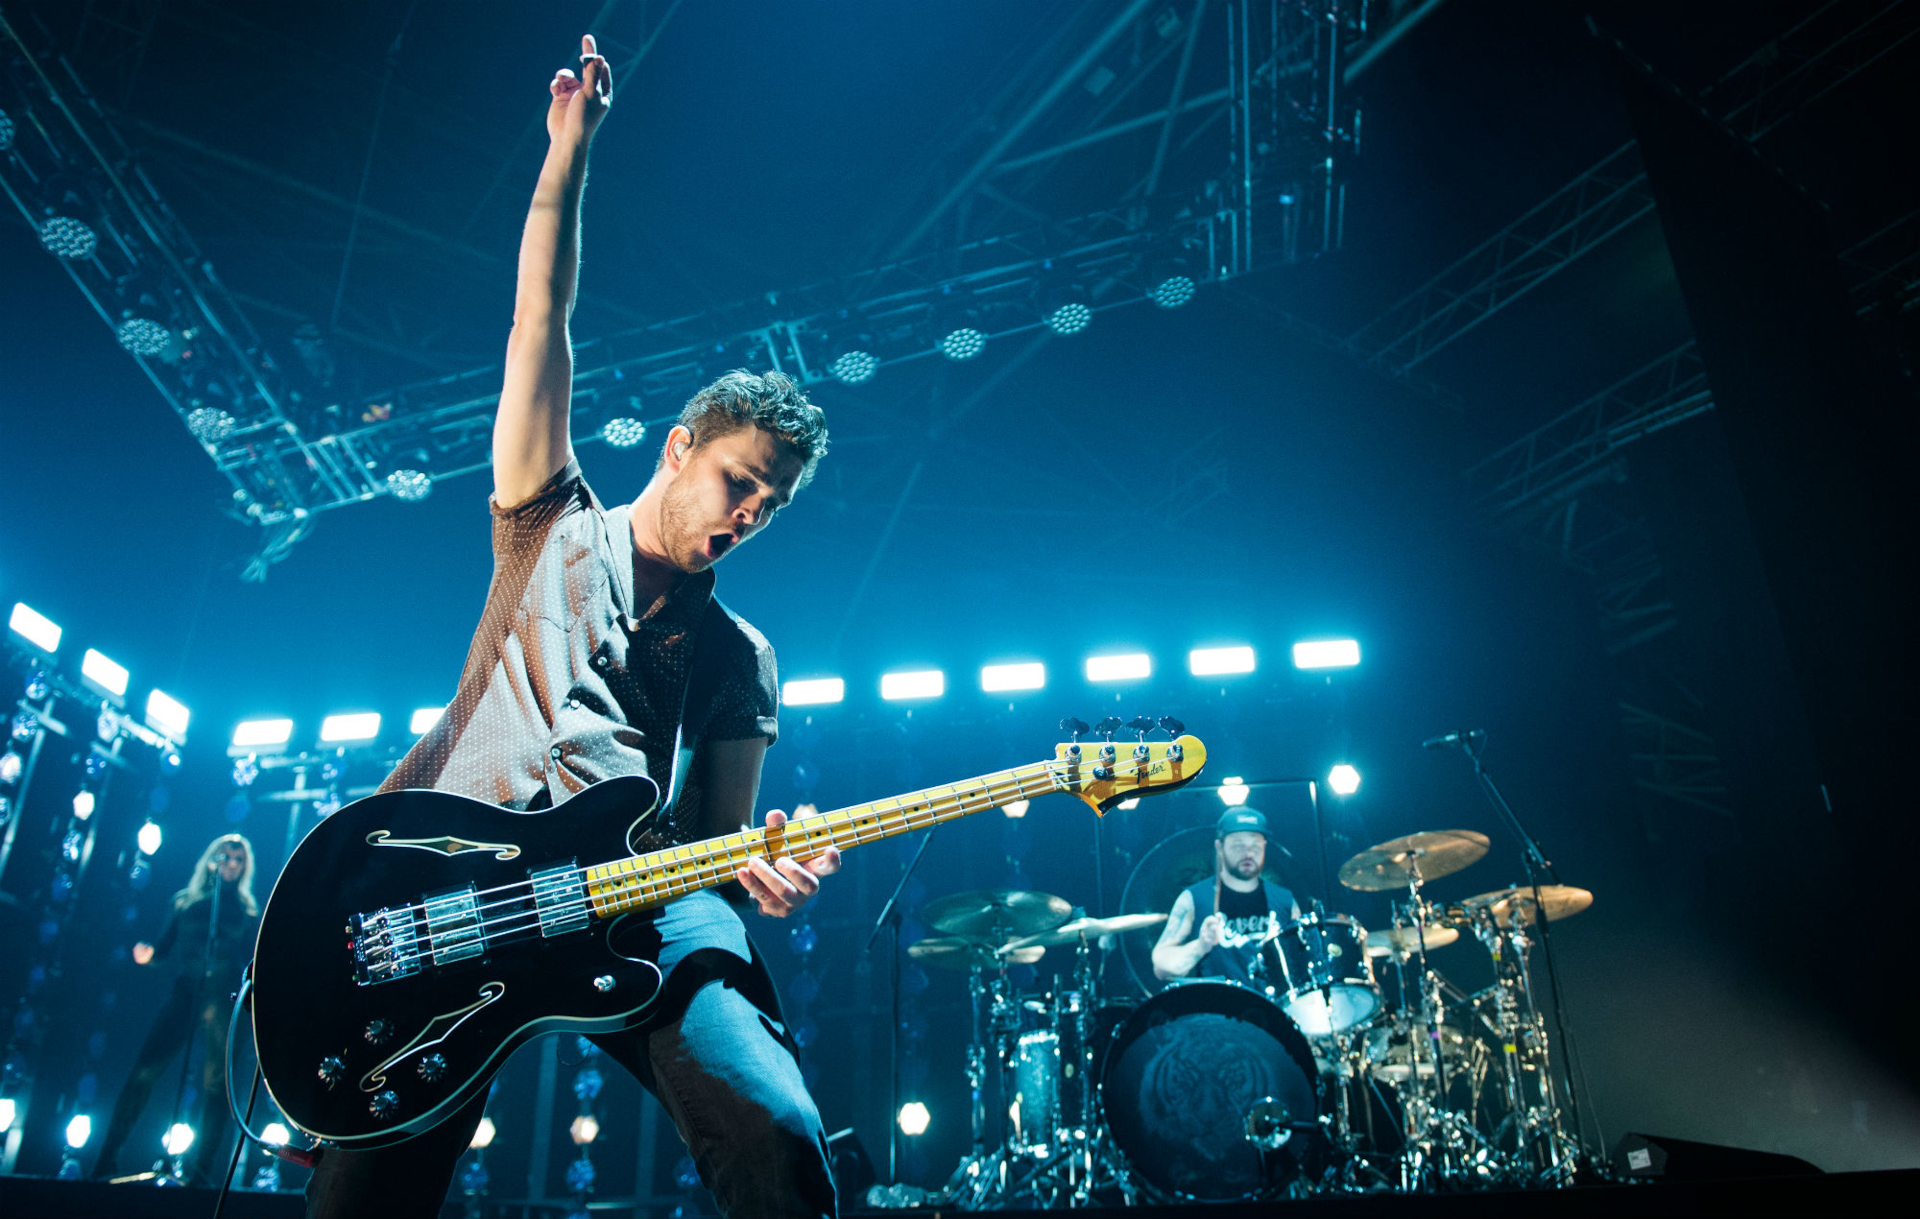 HD desktop wallpaper of Royal Blood musicians performing live on stage, featuring a dynamic shot of the bassist in the foreground and the drummer in the background, surrounded by vibrant stage lighting.